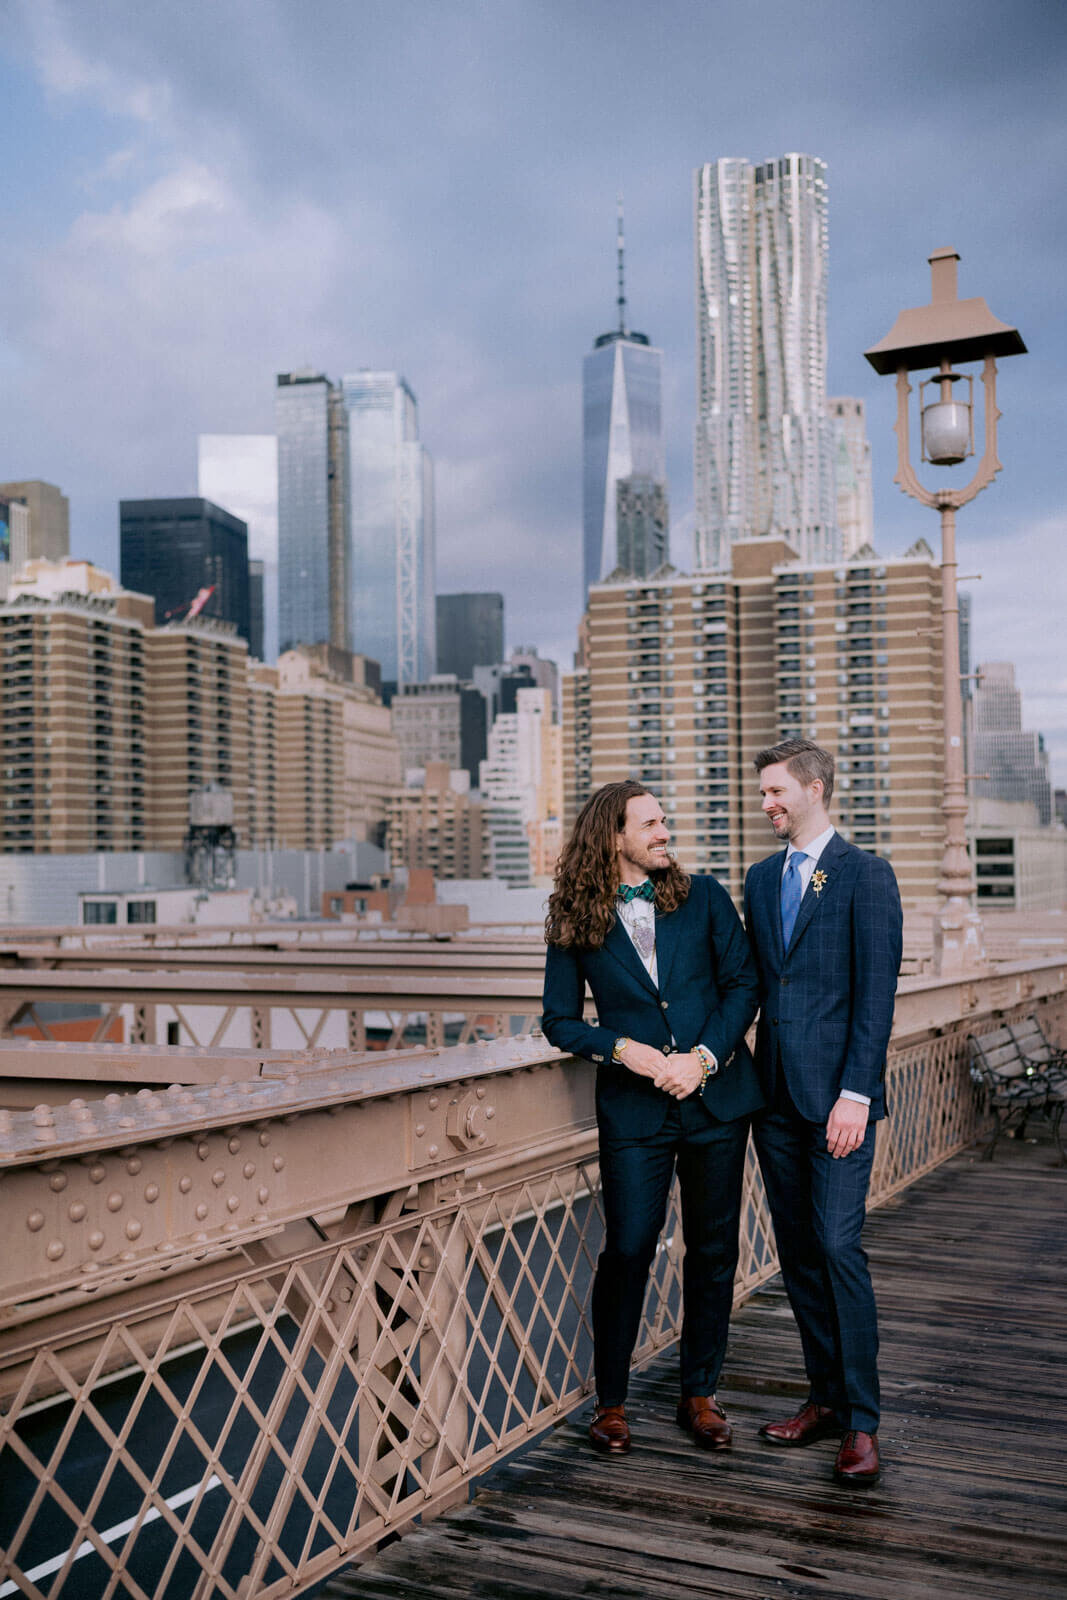 The two grooms are chatting on the Brooklyn Bridge, with skyscrapers in the background. NYC Elopement Image by Jenny Fu Studio